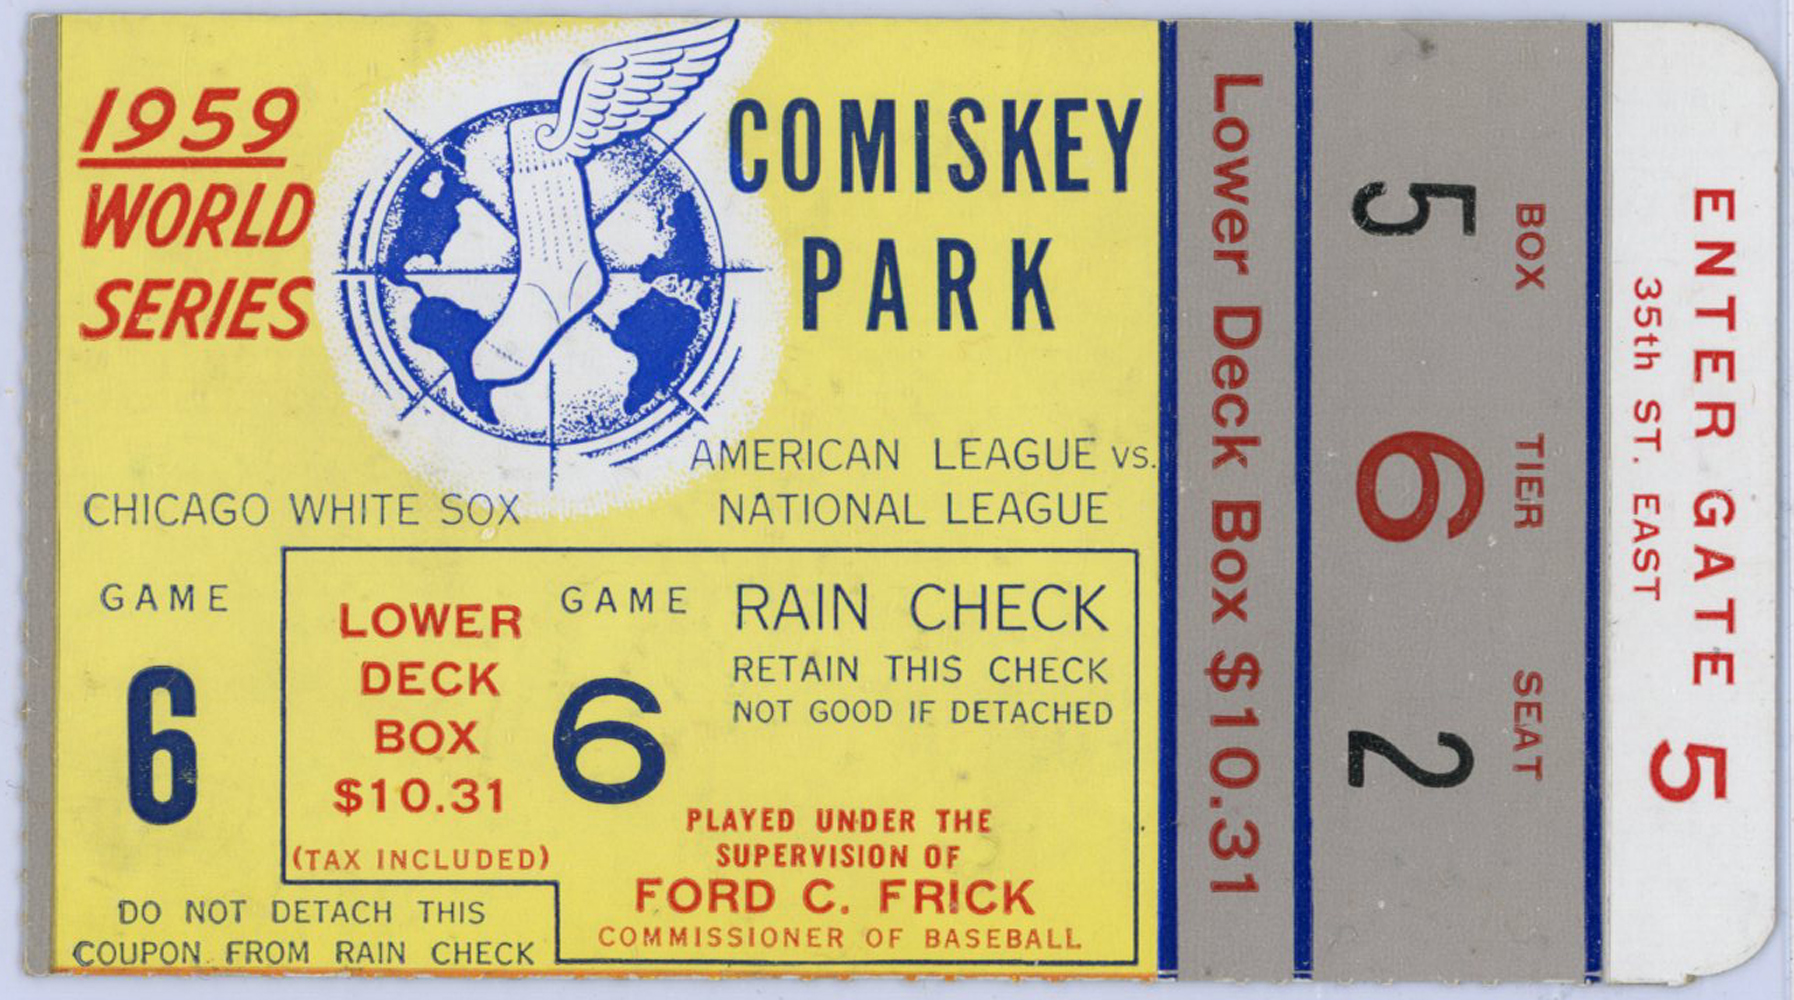 1959 World Series Game 6 Ticket Stub Los Angeles Dodgers vs White Sox